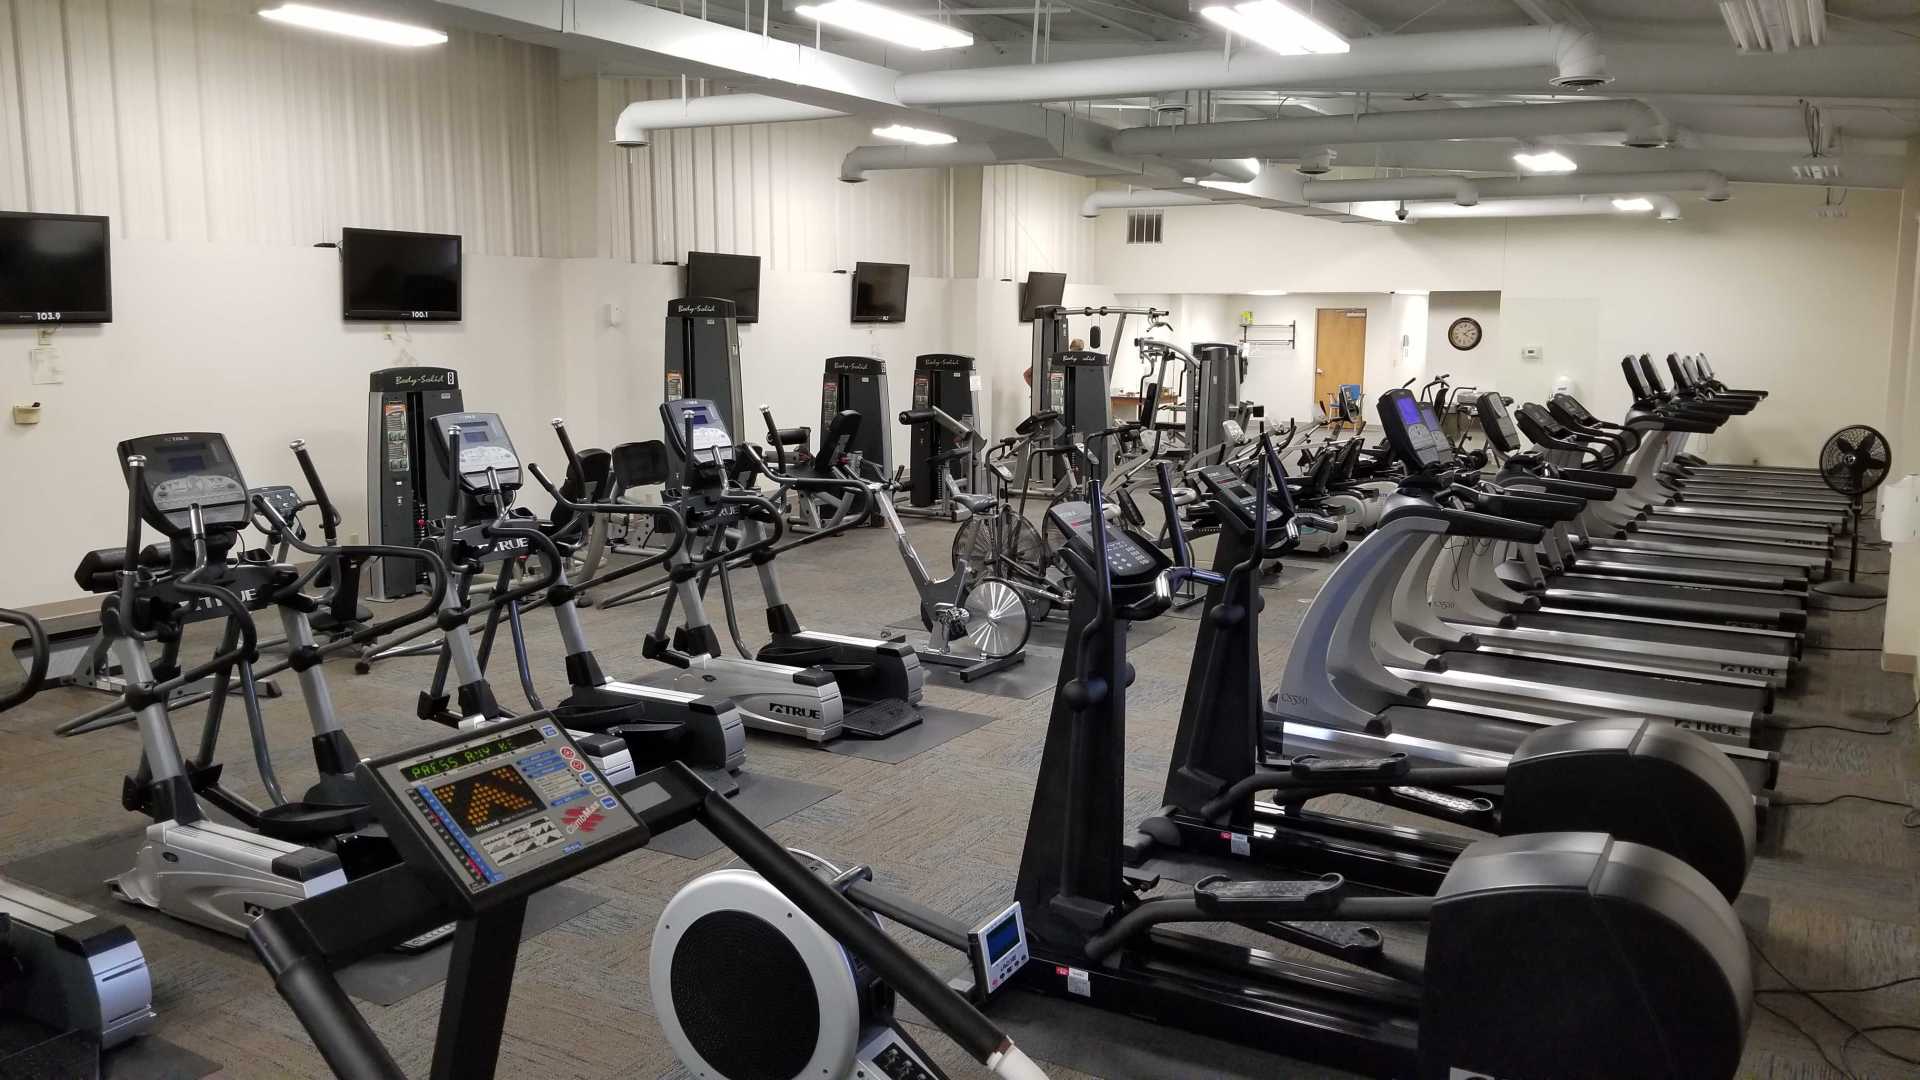 a large gym filled with lots of exercise equipment.